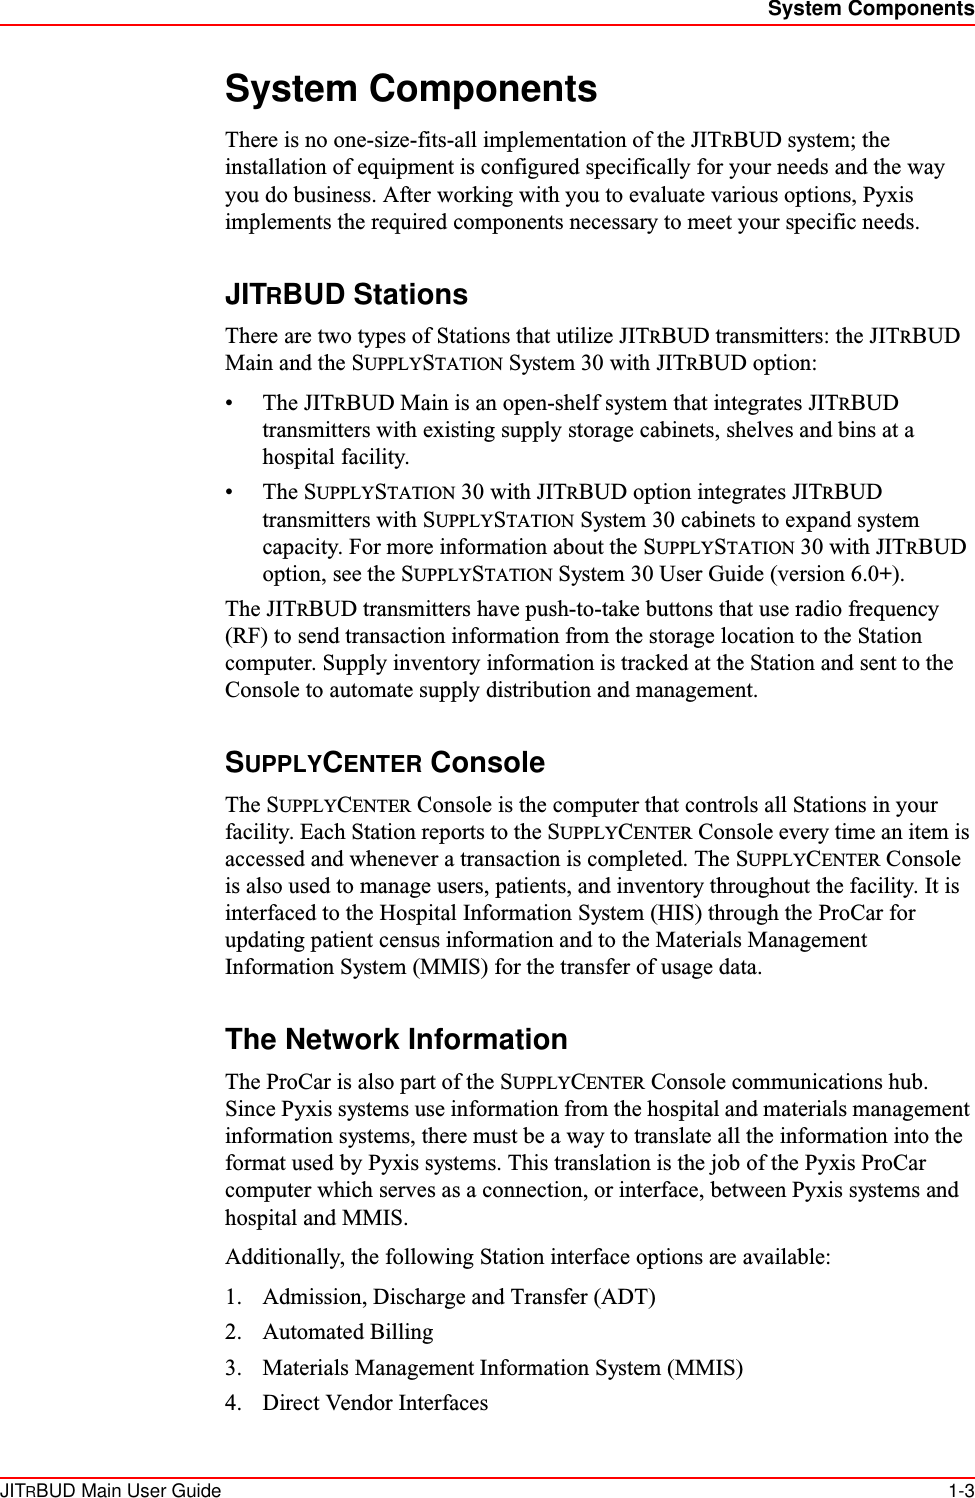 System ComponentsJITRBUD Main User Guide 1-3System ComponentsThere is no one-size-fits-all implementation of the JITRBUD system; the installation of equipment is configured specifically for your needs and the way you do business. After working with you to evaluate various options, Pyxis implements the required components necessary to meet your specific needs.JITRBUD StationsThere are two types of Stations that utilize JITRBUD transmitters: the JITRBUD Main and the SUPPLYSTATION System 30 with JITRBUD option:•The JITRBUD Main is an open-shelf system that integrates JITRBUD transmitters with existing supply storage cabinets, shelves and bins at a hospital facility. •The SUPPLYSTATION 30 with JITRBUD option integrates JITRBUD transmitters with SUPPLYSTATION System 30 cabinets to expand system capacity. For more information about the SUPPLYSTATION 30 with JITRBUD option, see the SUPPLYSTATION System 30 User Guide (version 6.0+).The JITRBUD transmitters have push-to-take buttons that use radio frequency (RF) to send transaction information from the storage location to the Station computer. Supply inventory information is tracked at the Station and sent to the Console to automate supply distribution and management.SUPPLYCENTER ConsoleThe SUPPLYCENTER Console is the computer that controls all Stations in your facility. Each Station reports to the SUPPLYCENTER Console every time an item is accessed and whenever a transaction is completed. The SUPPLYCENTER Console is also used to manage users, patients, and inventory throughout the facility. It is interfaced to the Hospital Information System (HIS) through the ProCar for updating patient census information and to the Materials Management Information System (MMIS) for the transfer of usage data.The Network InformationThe ProCar is also part of the SUPPLYCENTER Console communications hub. Since Pyxis systems use information from the hospital and materials management information systems, there must be a way to translate all the information into the format used by Pyxis systems. This translation is the job of the Pyxis ProCar computer which serves as a connection, or interface, between Pyxis systems and hospital and MMIS.Additionally, the following Station interface options are available:1. Admission, Discharge and Transfer (ADT)2. Automated Billing3. Materials Management Information System (MMIS)4. Direct Vendor Interfaces